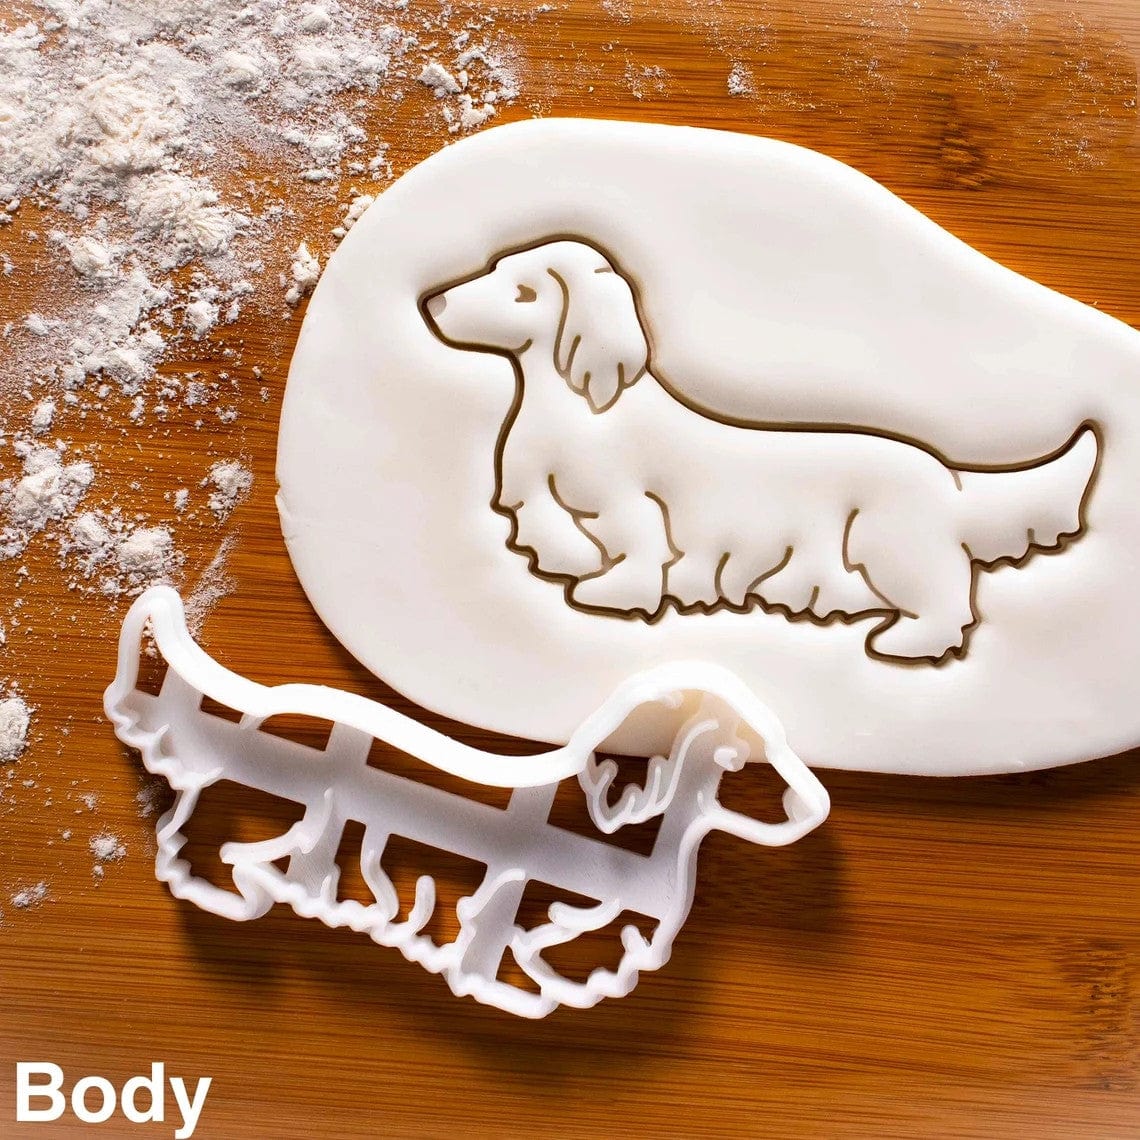 Longhaired Dachshund Cookie Cutter Set Body The Doxie World